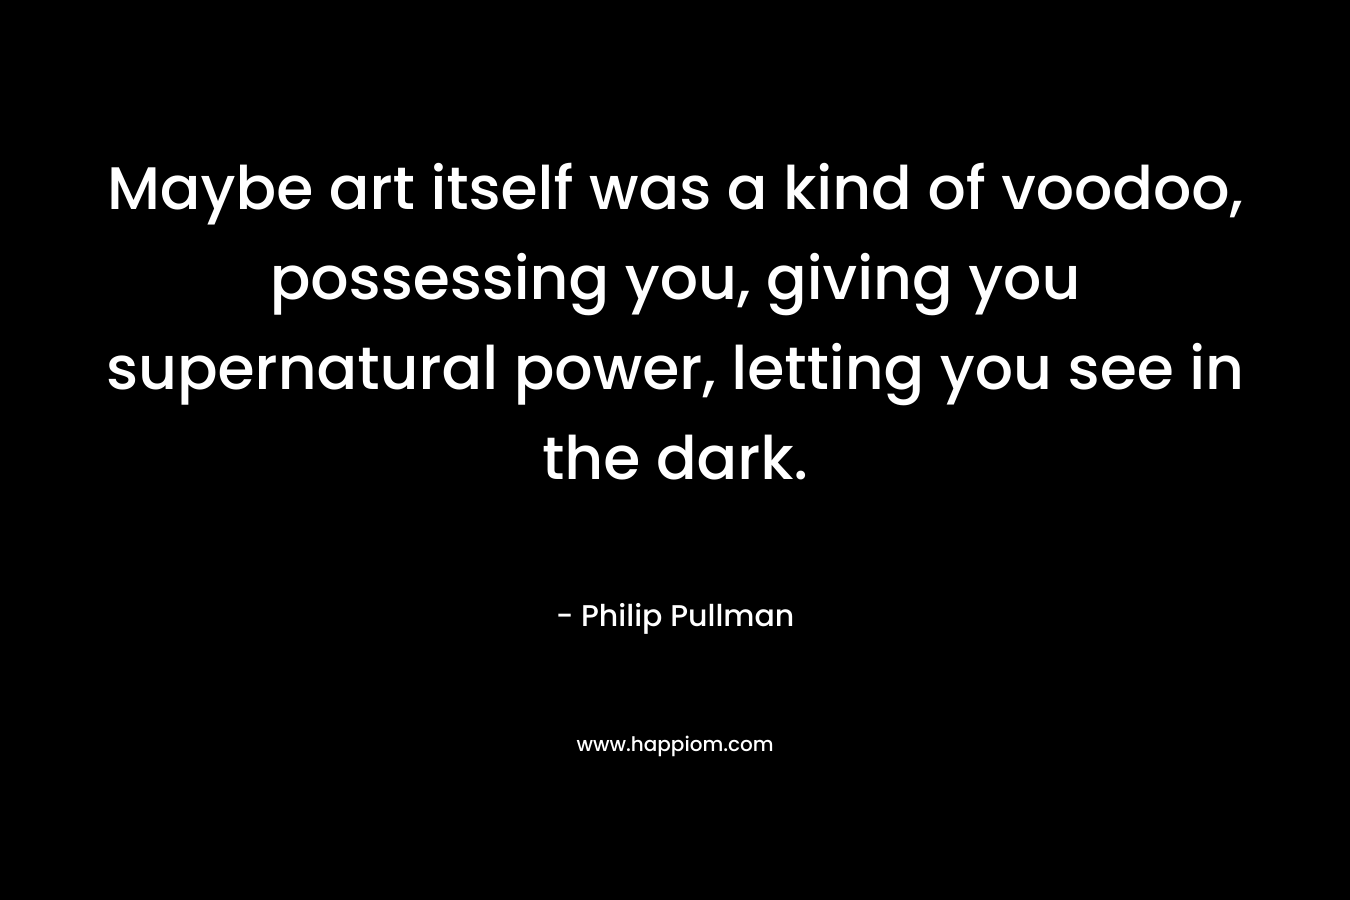 Maybe art itself was a kind of voodoo, possessing you, giving you supernatural power, letting you see in the dark. – Philip Pullman